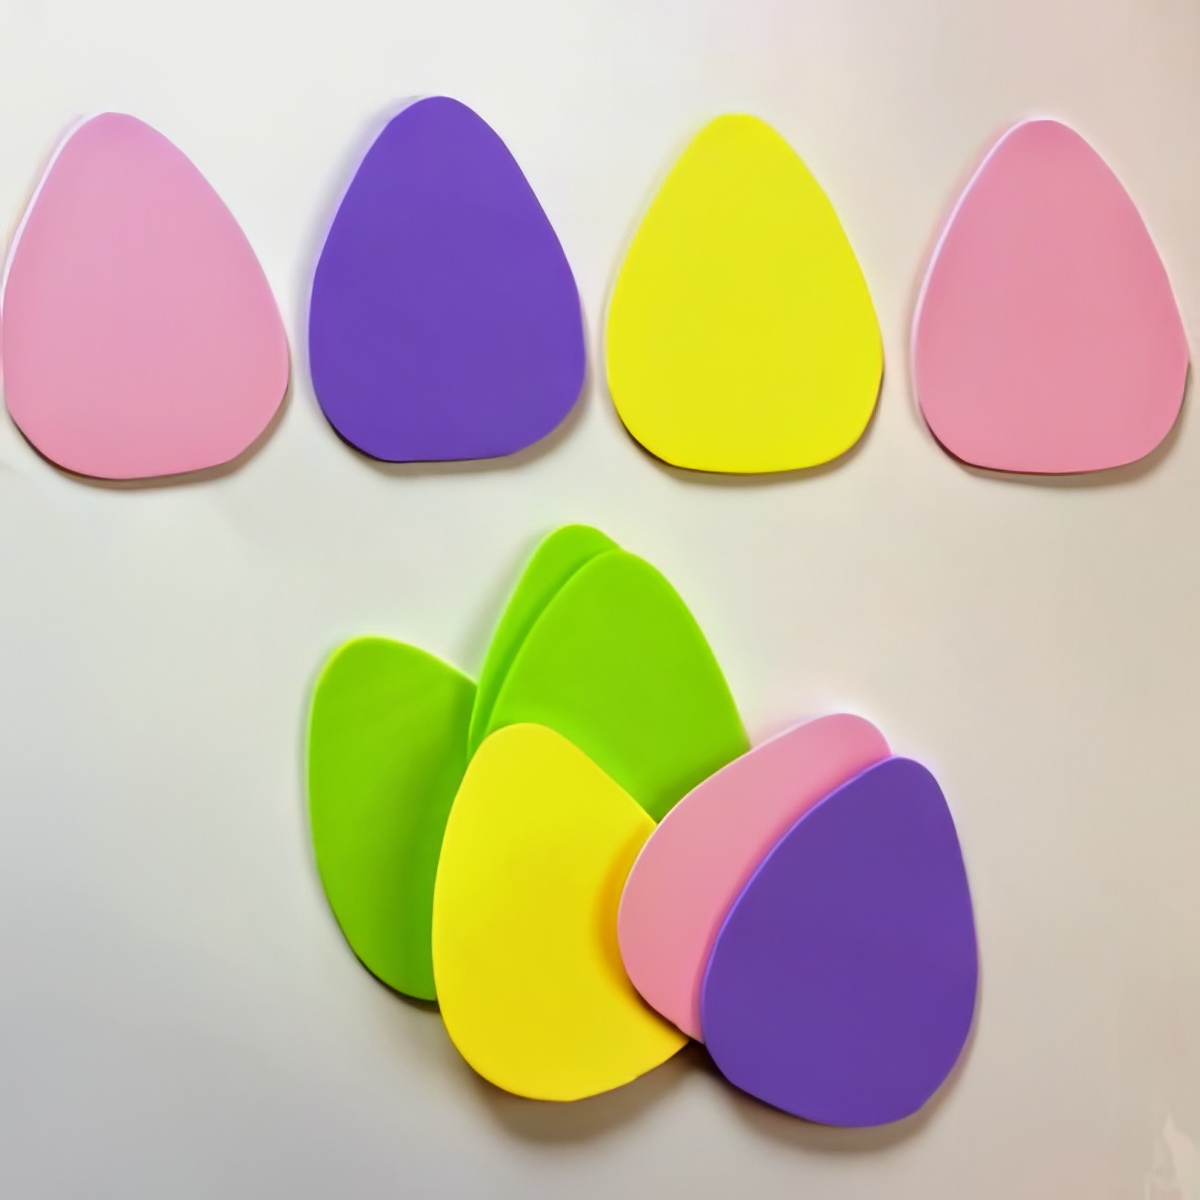 Create different colors of felt eggs for your little one for a rainy Easy egg hunt!